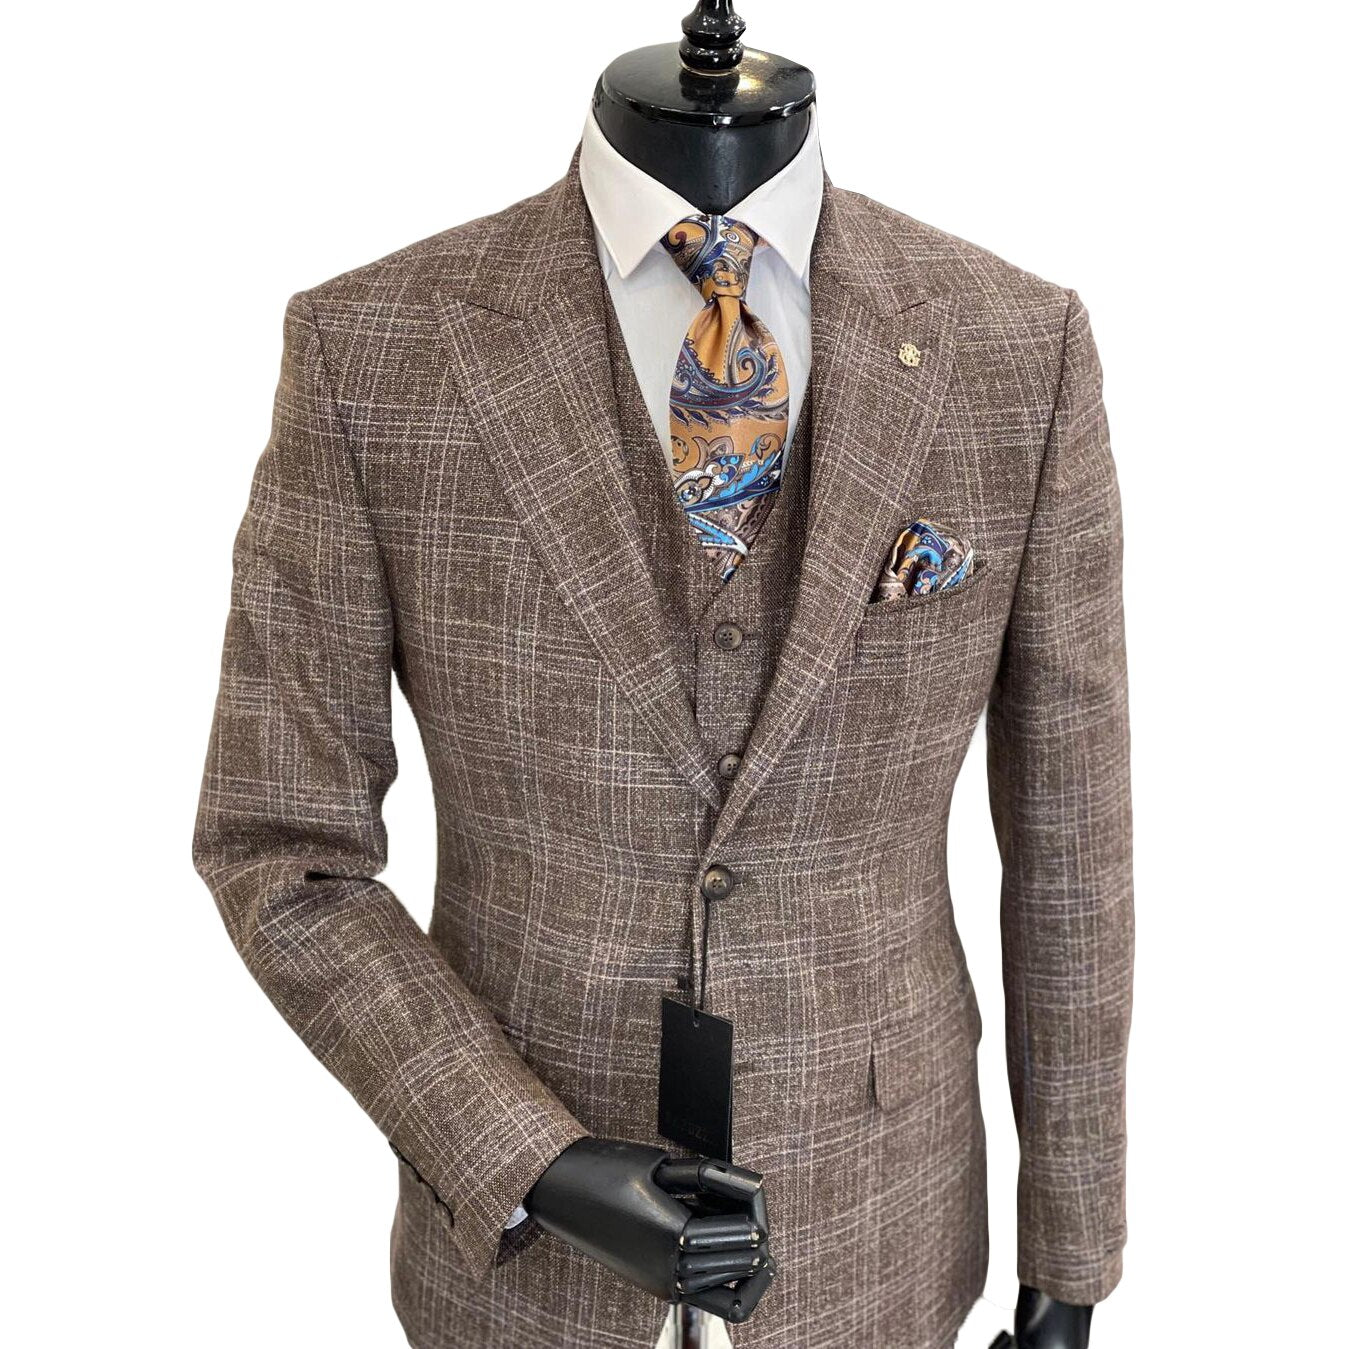 Classic Brown Stripe Wedding Men Suits There-pieces Slim Fit Tuxedos